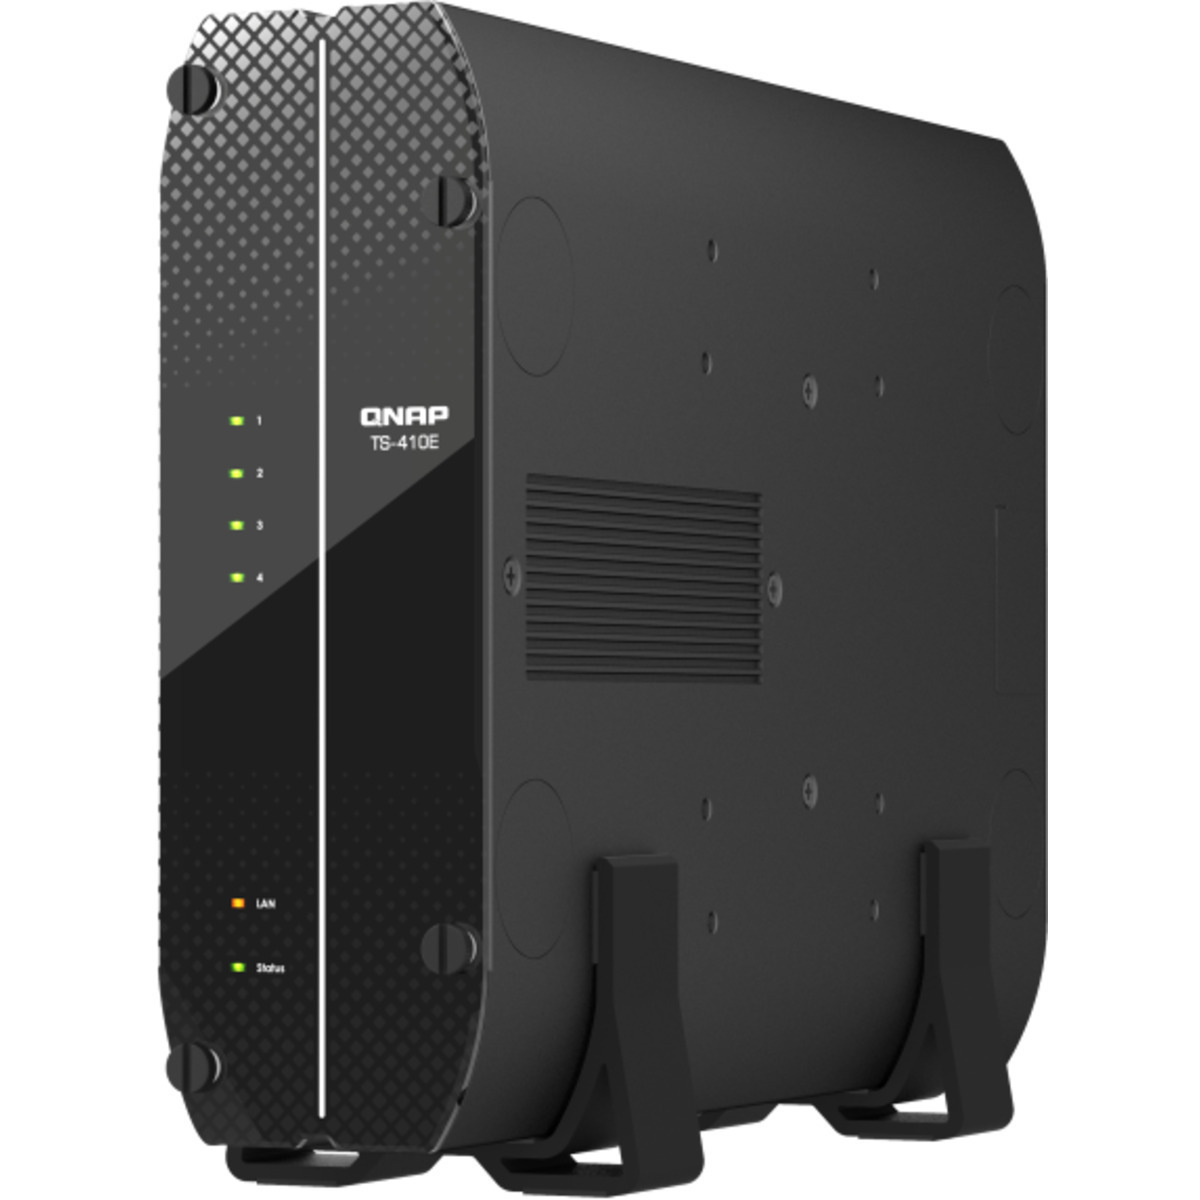 buy QNAP TS-410E 4tb Desktop NAS - Network Attached Storage Device 4x1000gb Samsung 870 EVO MZ-77E1T0BAM 2.5 560/530MB/s SATA 6Gb/s SSD CONSUMER Class Drives Installed - Burn-In Tested - nas headquarters buy network attached storage server device das new raid-5 free shipping usa spring sale TS-410E